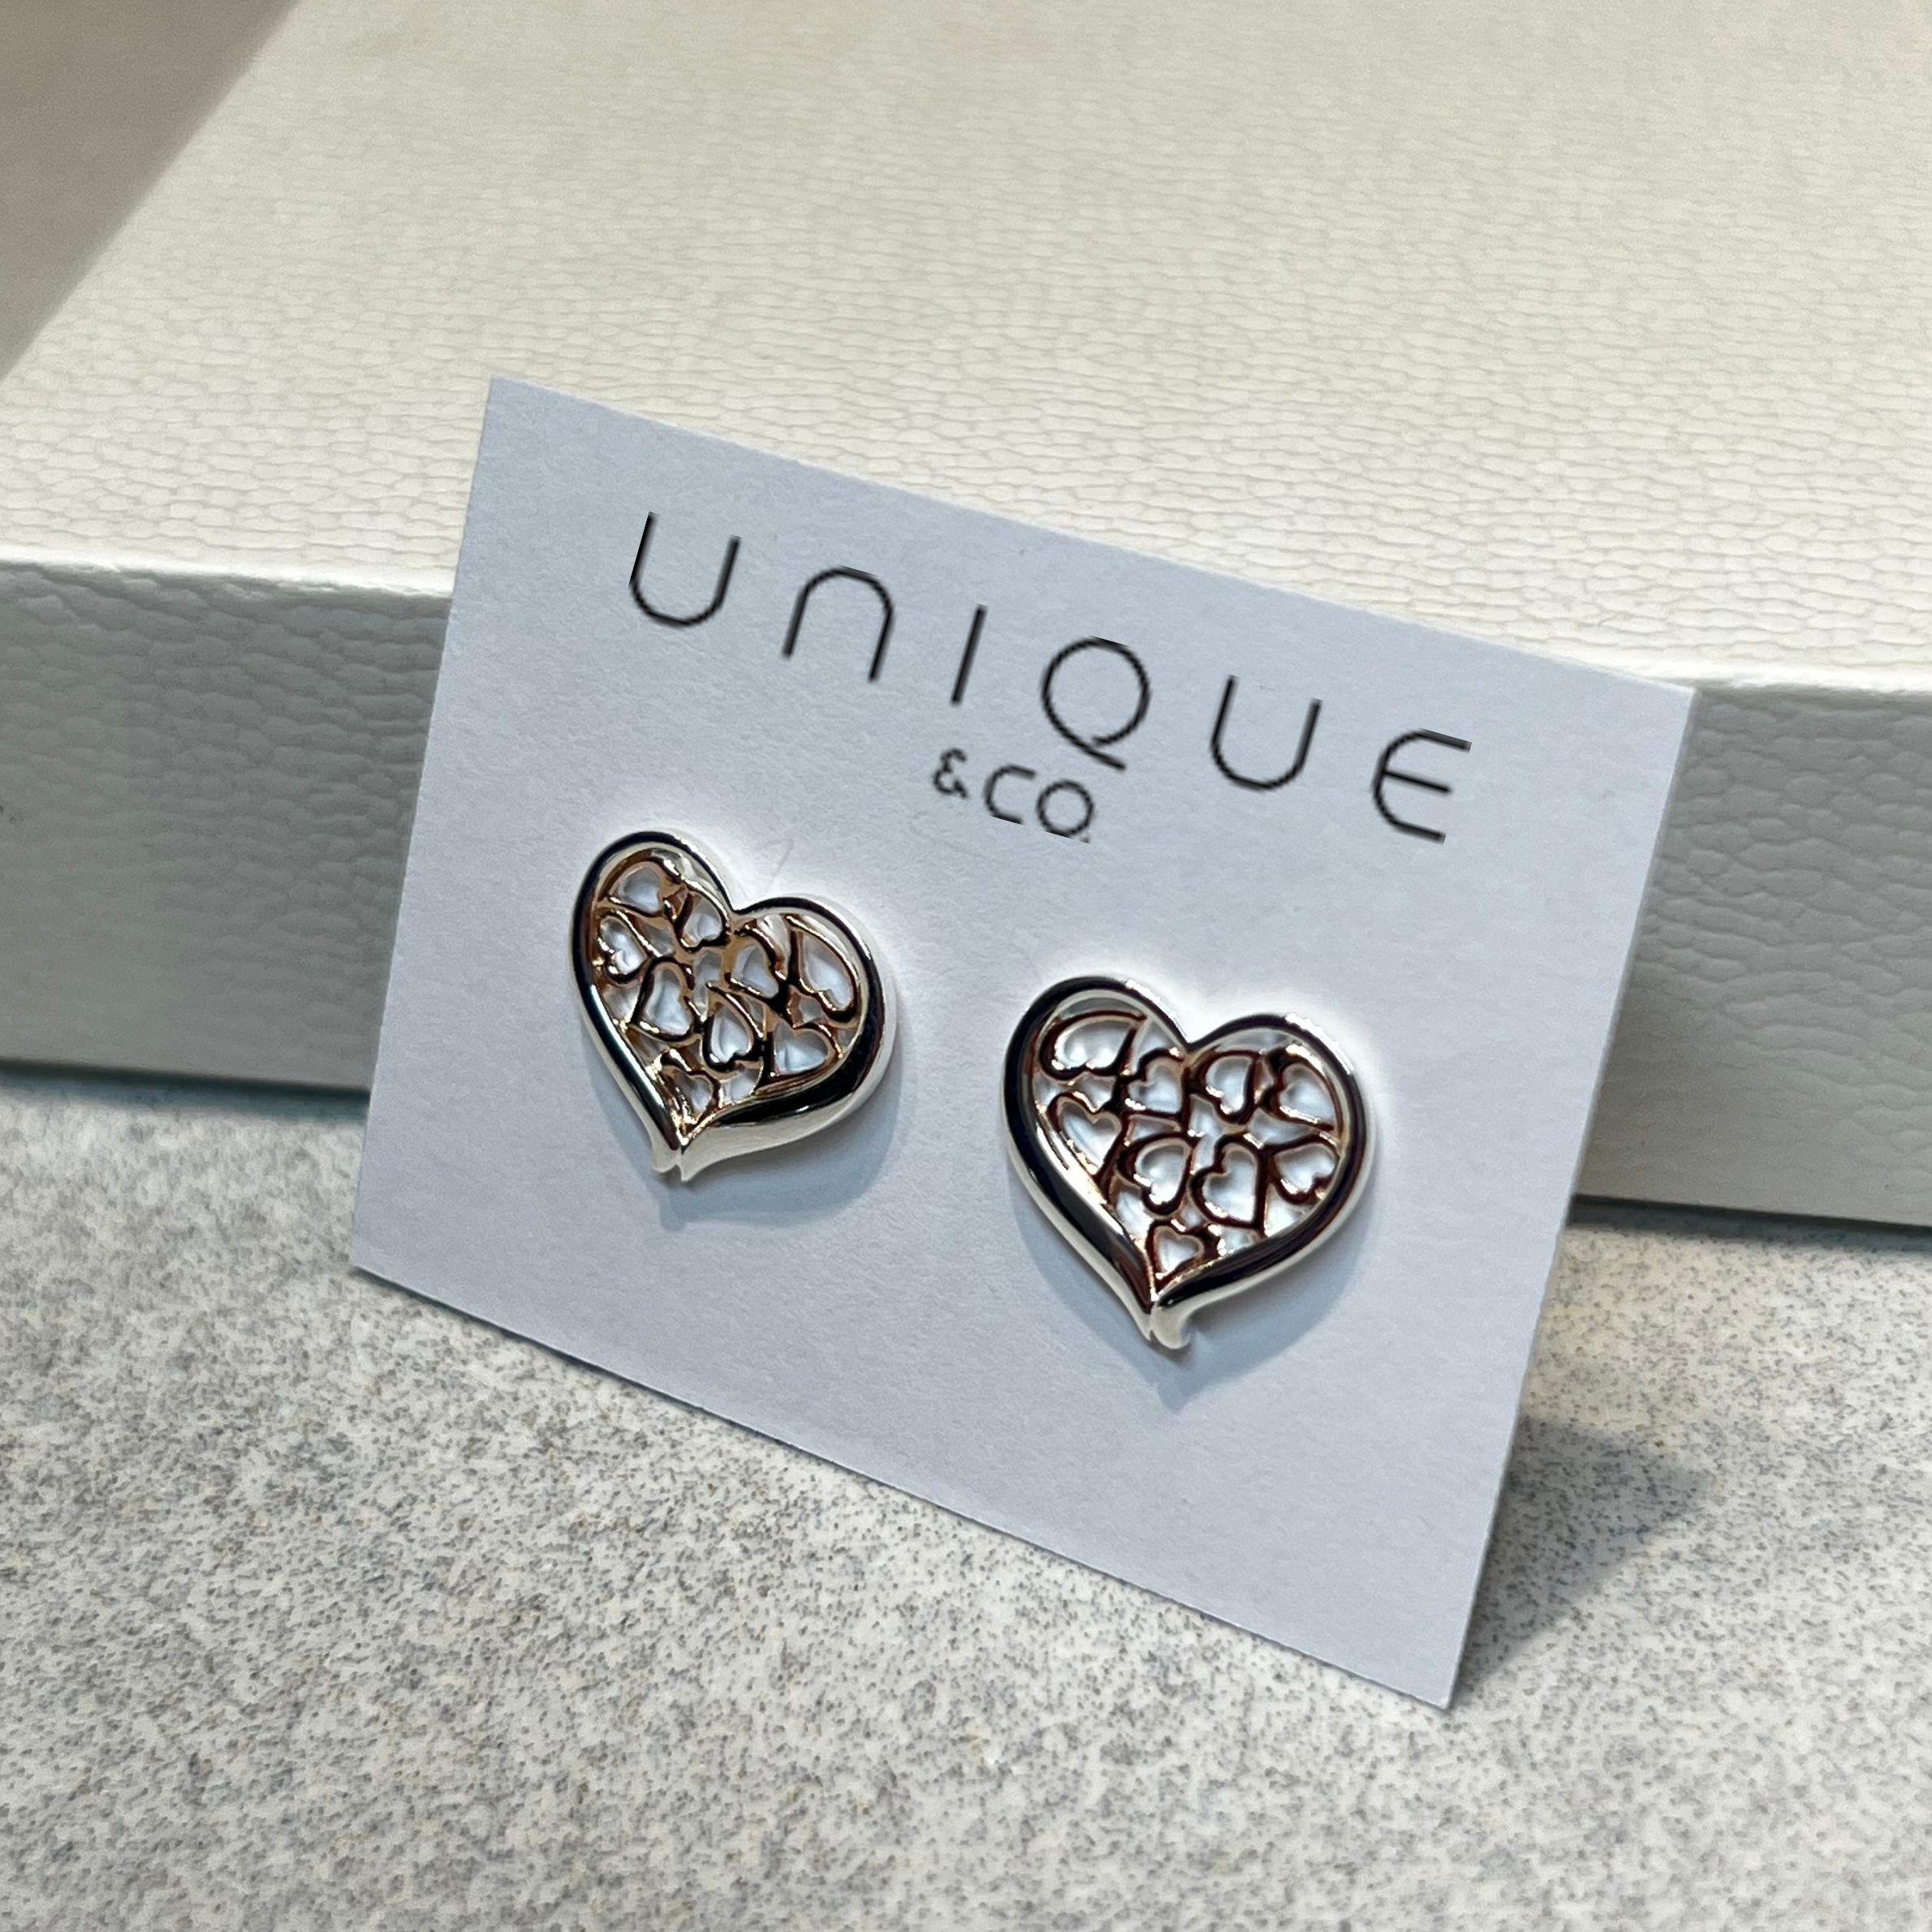 Unique & Co Sterling Silver & Rose Gold Hearts Earrings